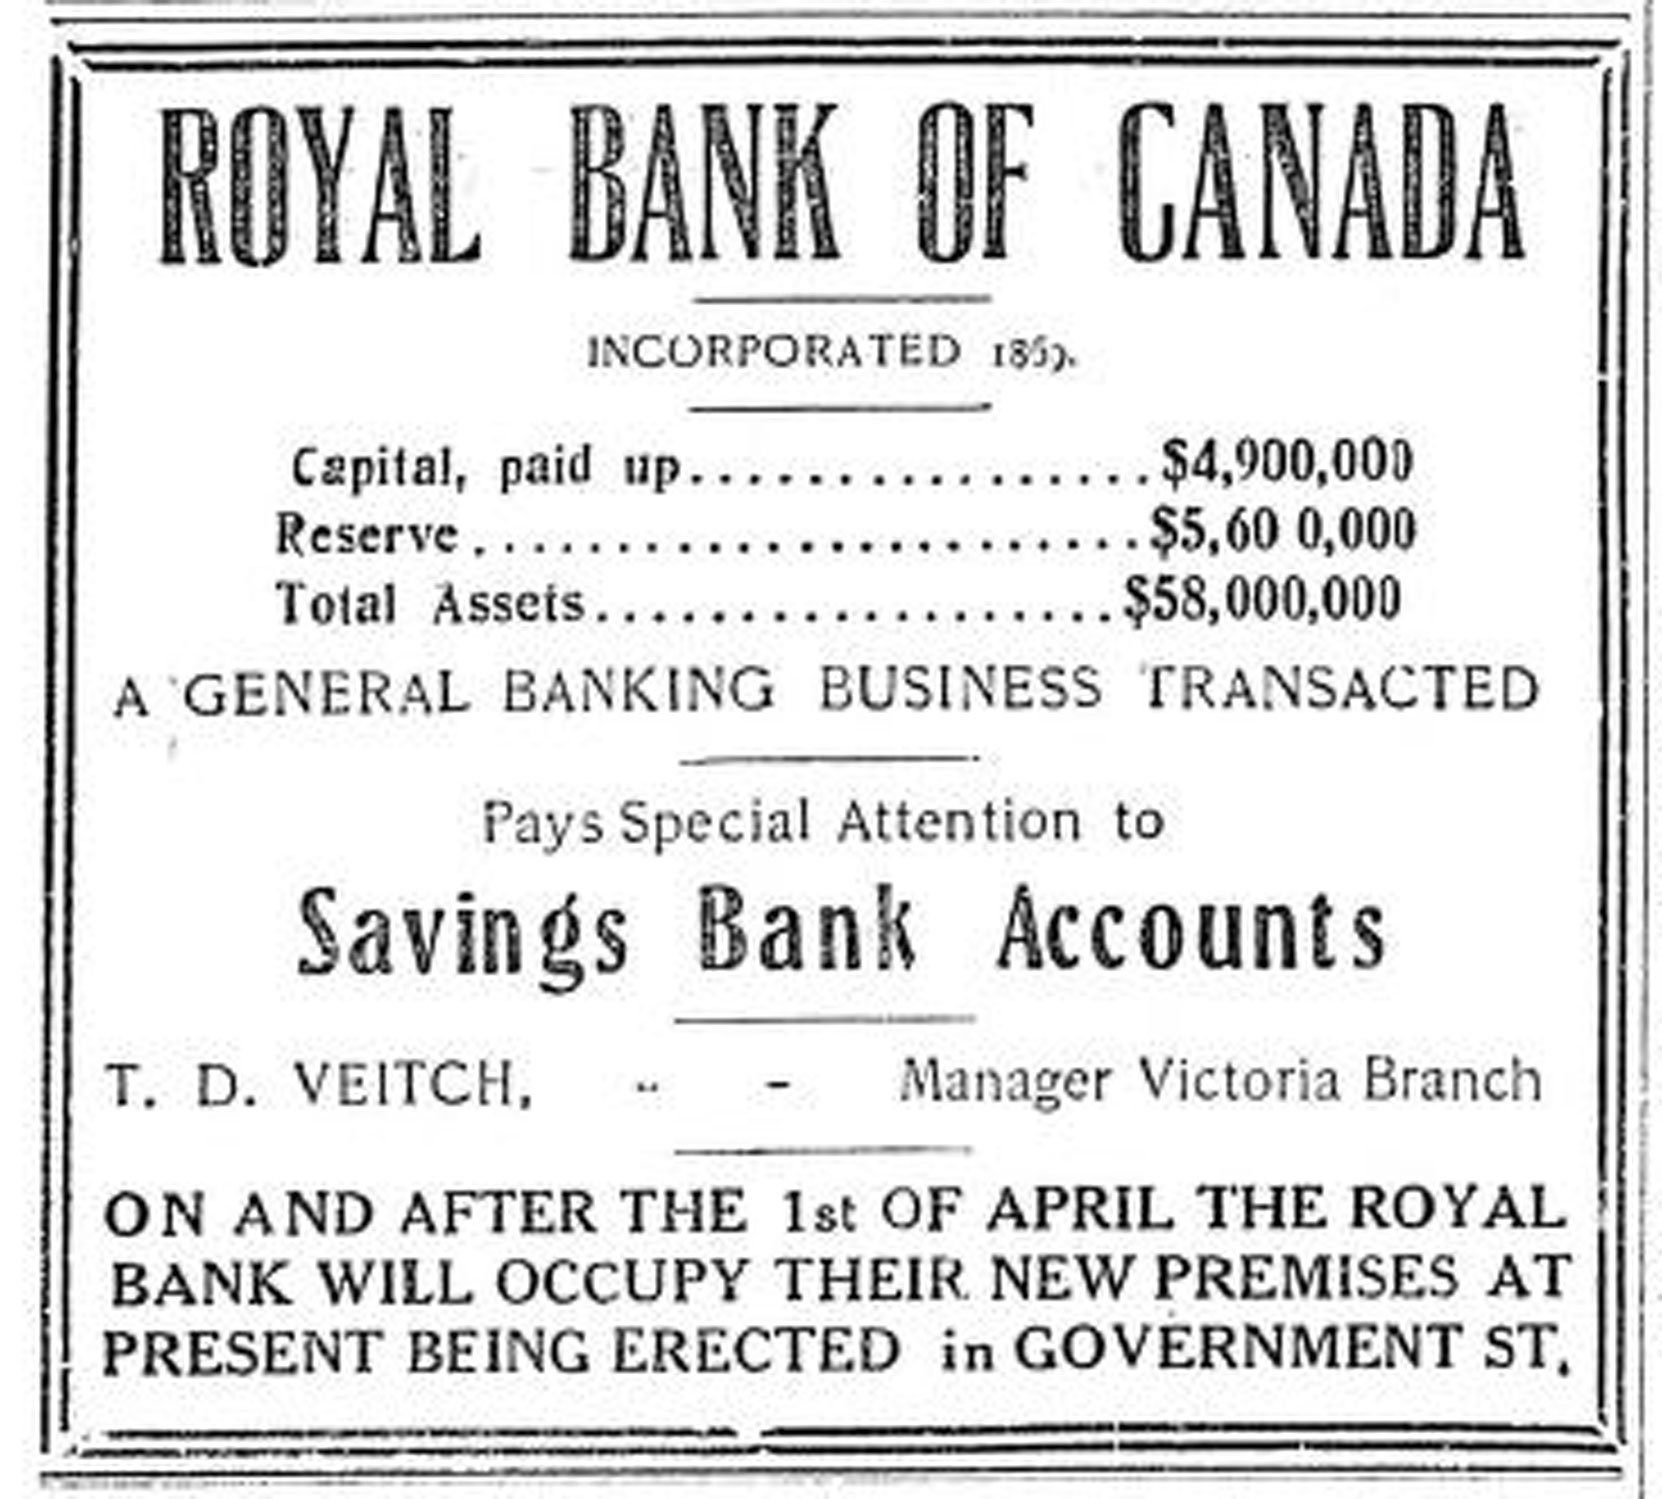 1909 advertisement for Royal Bank of Canada, Victoria Branch. The 